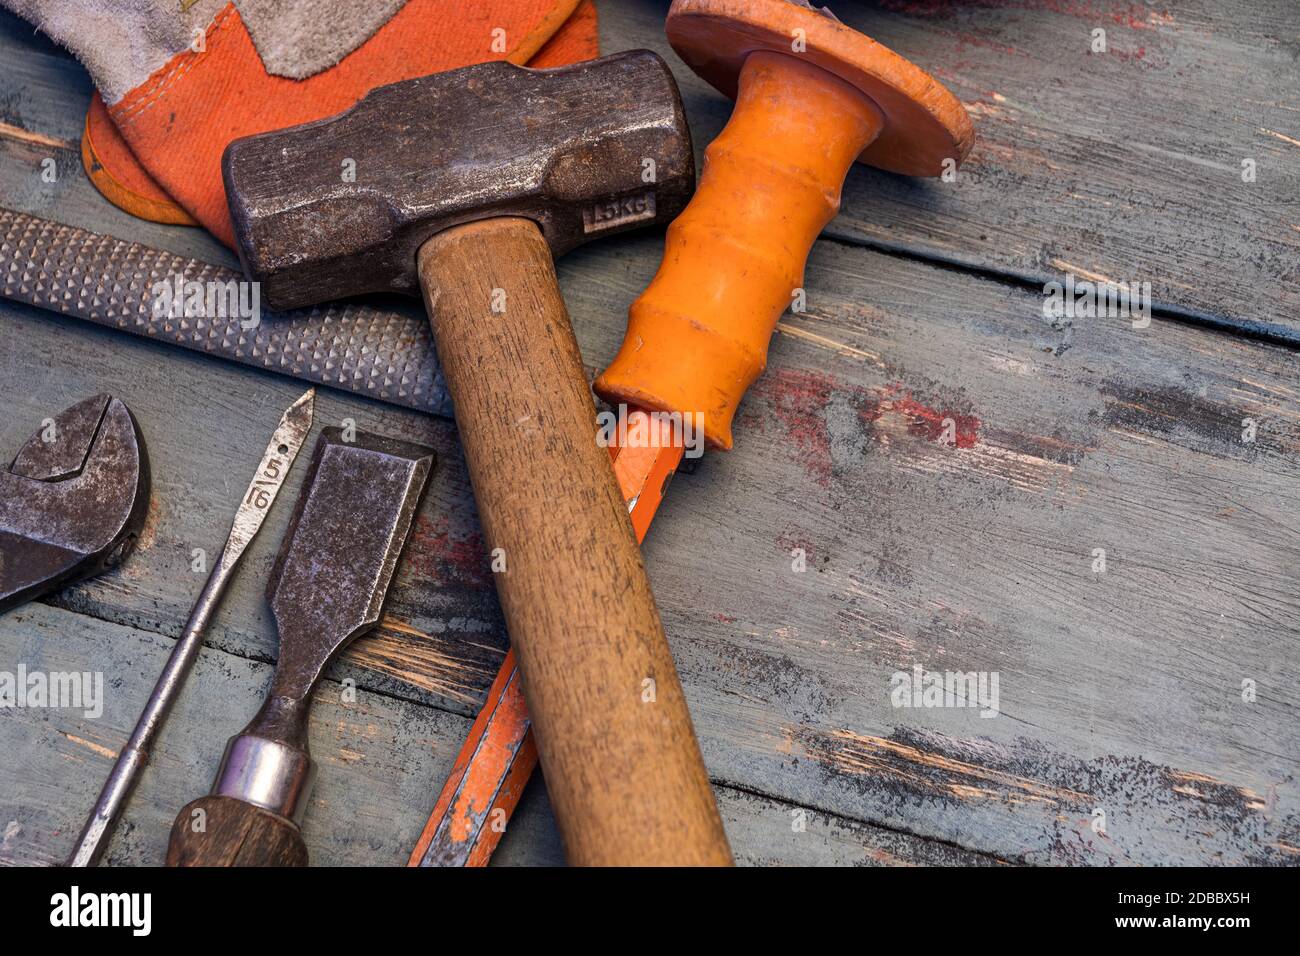 tools used for work at home or industry Stock Photo